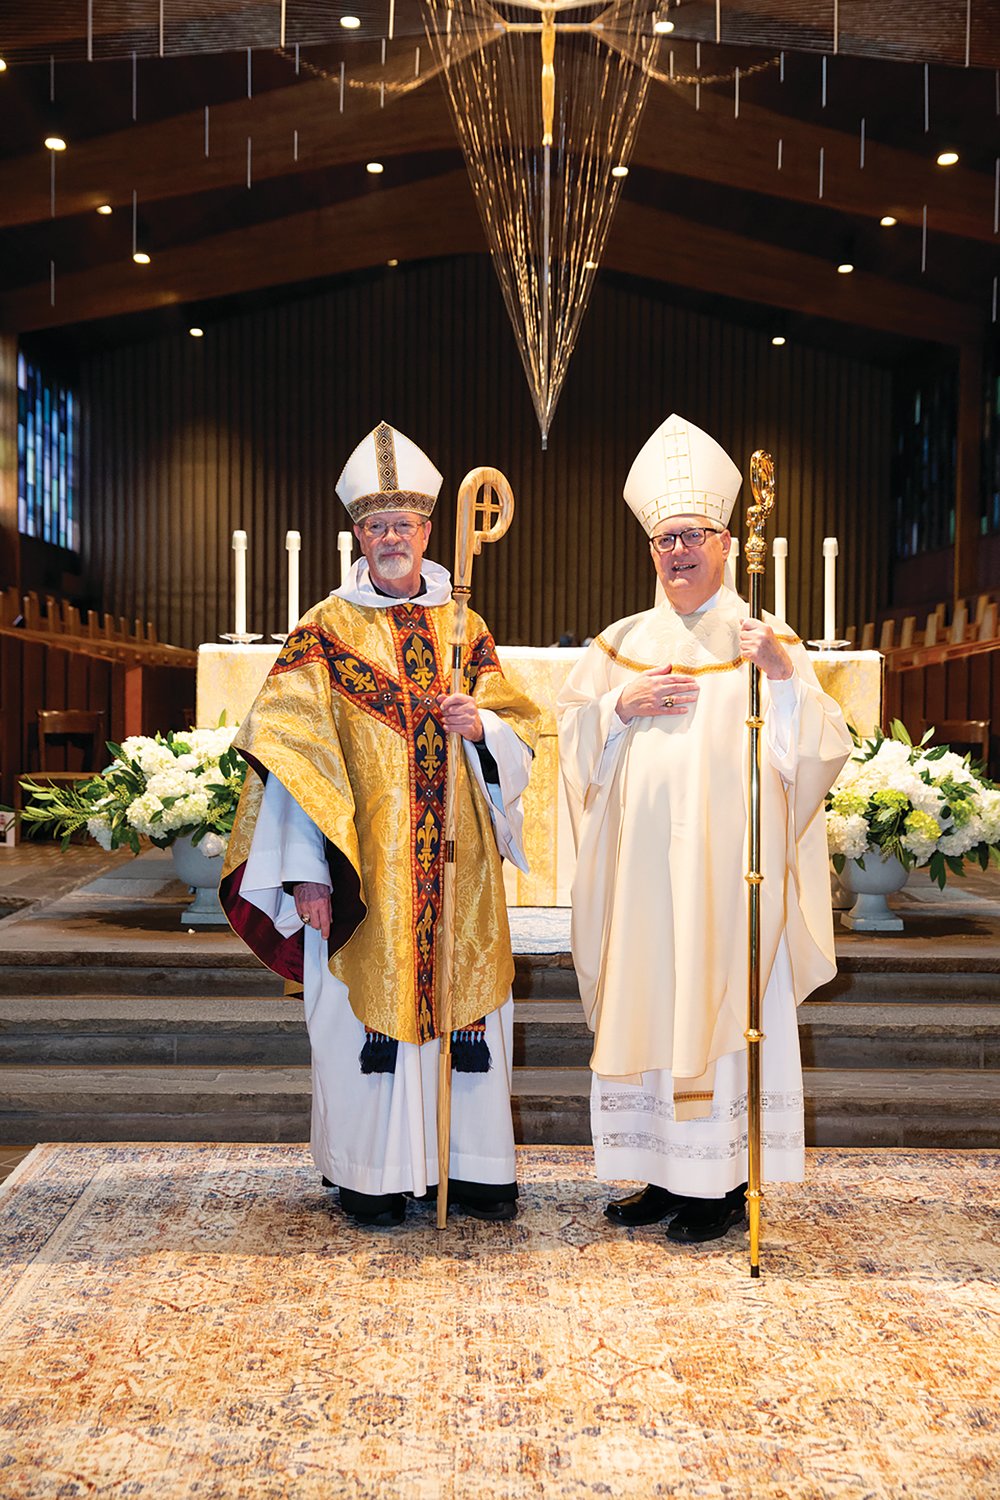 On Saturday, May 7, Bishop Thomas J. Tobin presided over the Abbatial Blessing of Father Michael Brunner, O.S.B., as the fourth Abbot of Portsmouth Abbey. Bishop Tobin said, “The Diocese of Providence is home to a good number of religious communities. We are blessed by their witness of holiness.”